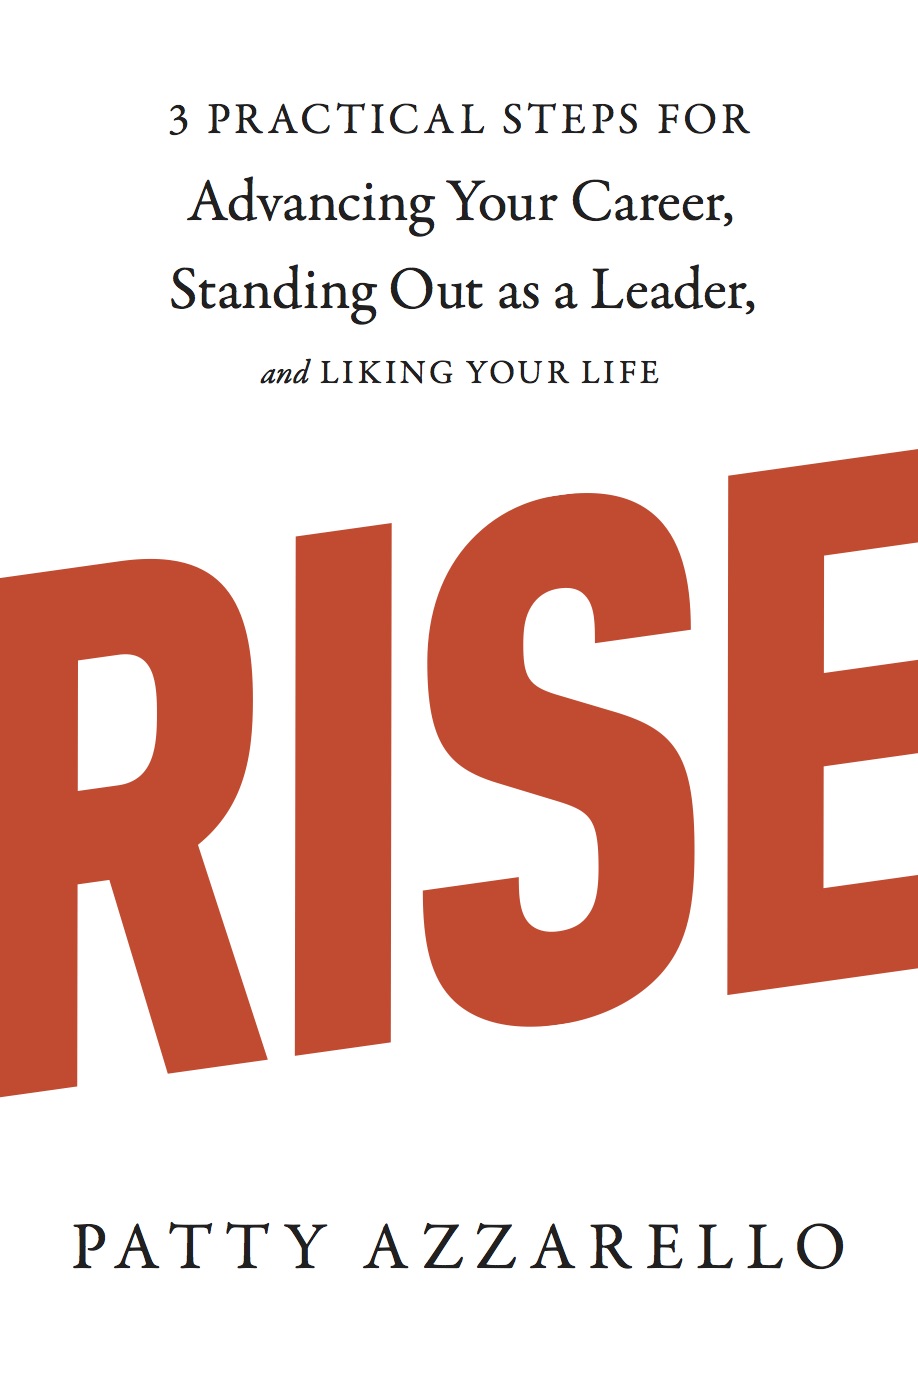 Rise: 3 Practical Steps for Advancing Your Career, Standing Out as a Leader, and Liking Your Life (T